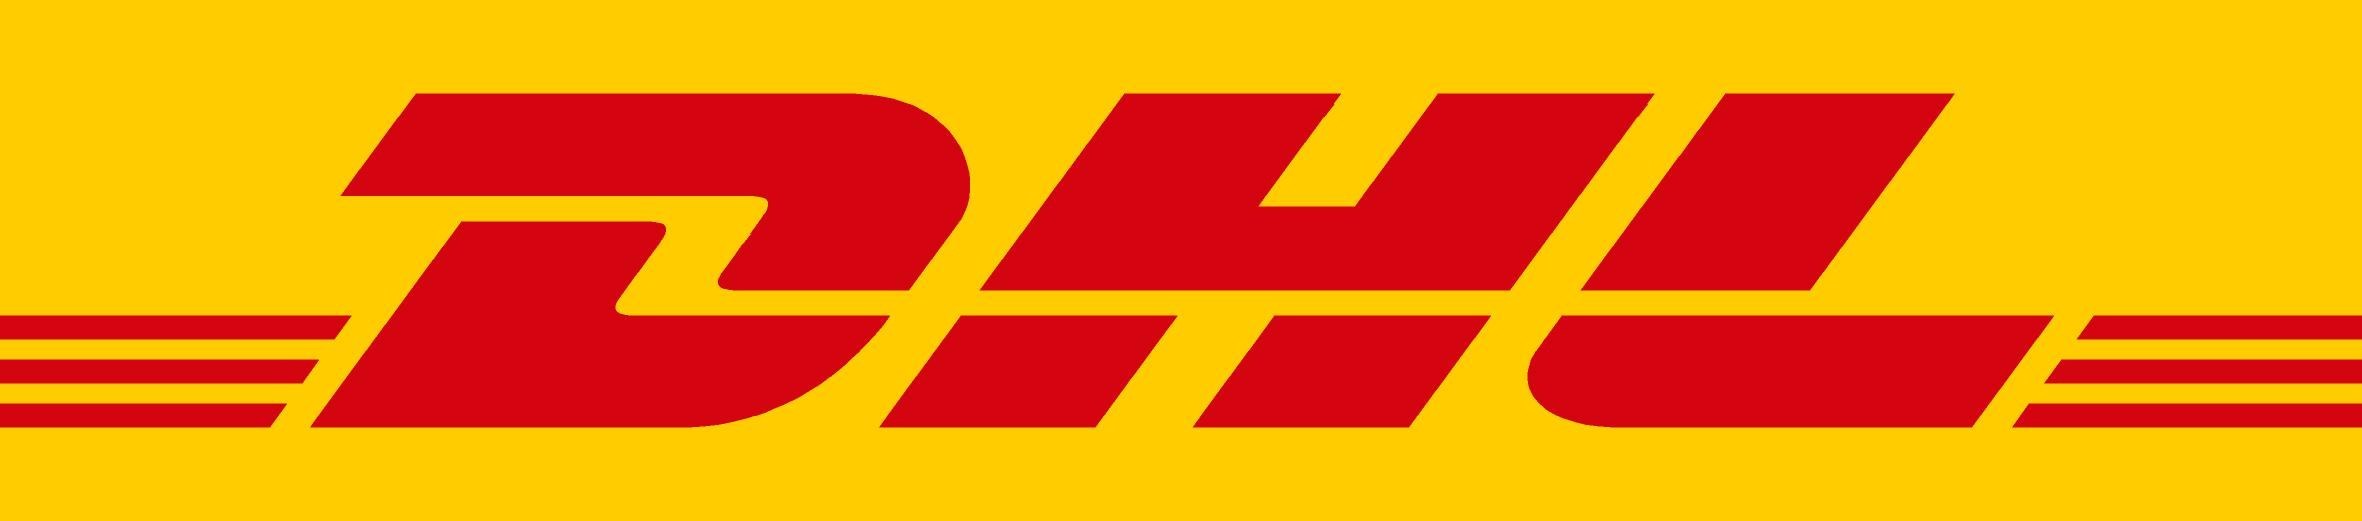 DHL, the world's leading logistics company, today launched its latest research report on digitalization in the supply chain. The report reveals that new technologies and solutions are developing at a fast-pace and disrupting industries on multiple fronts, with supply chains struggling to keep up.